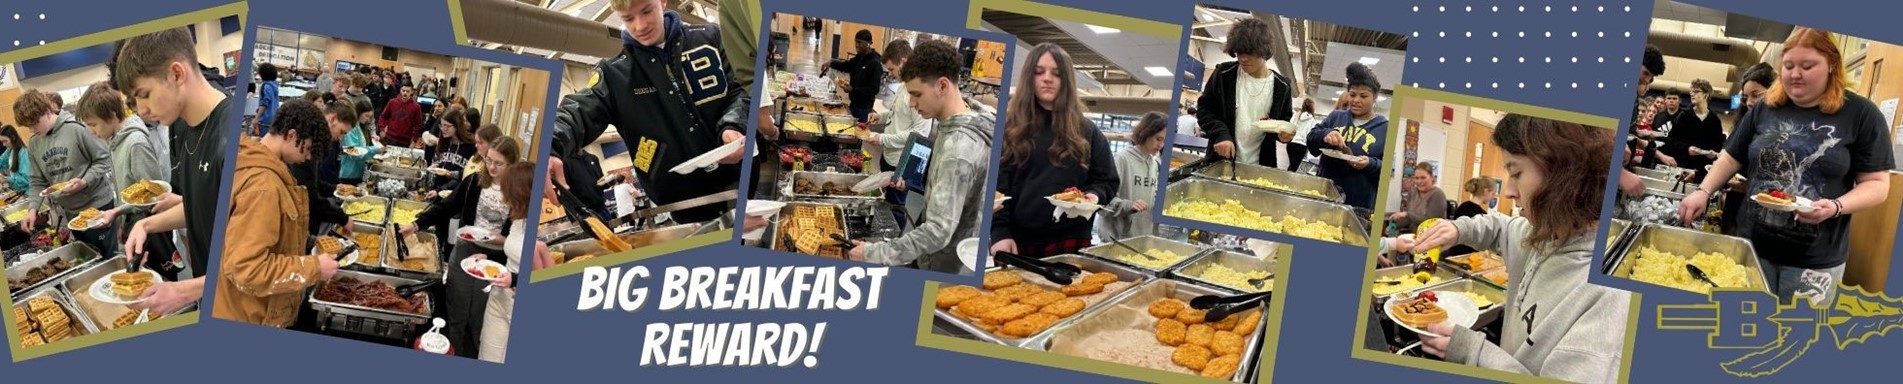 HS students rewarded with breakfast for positive behaviors